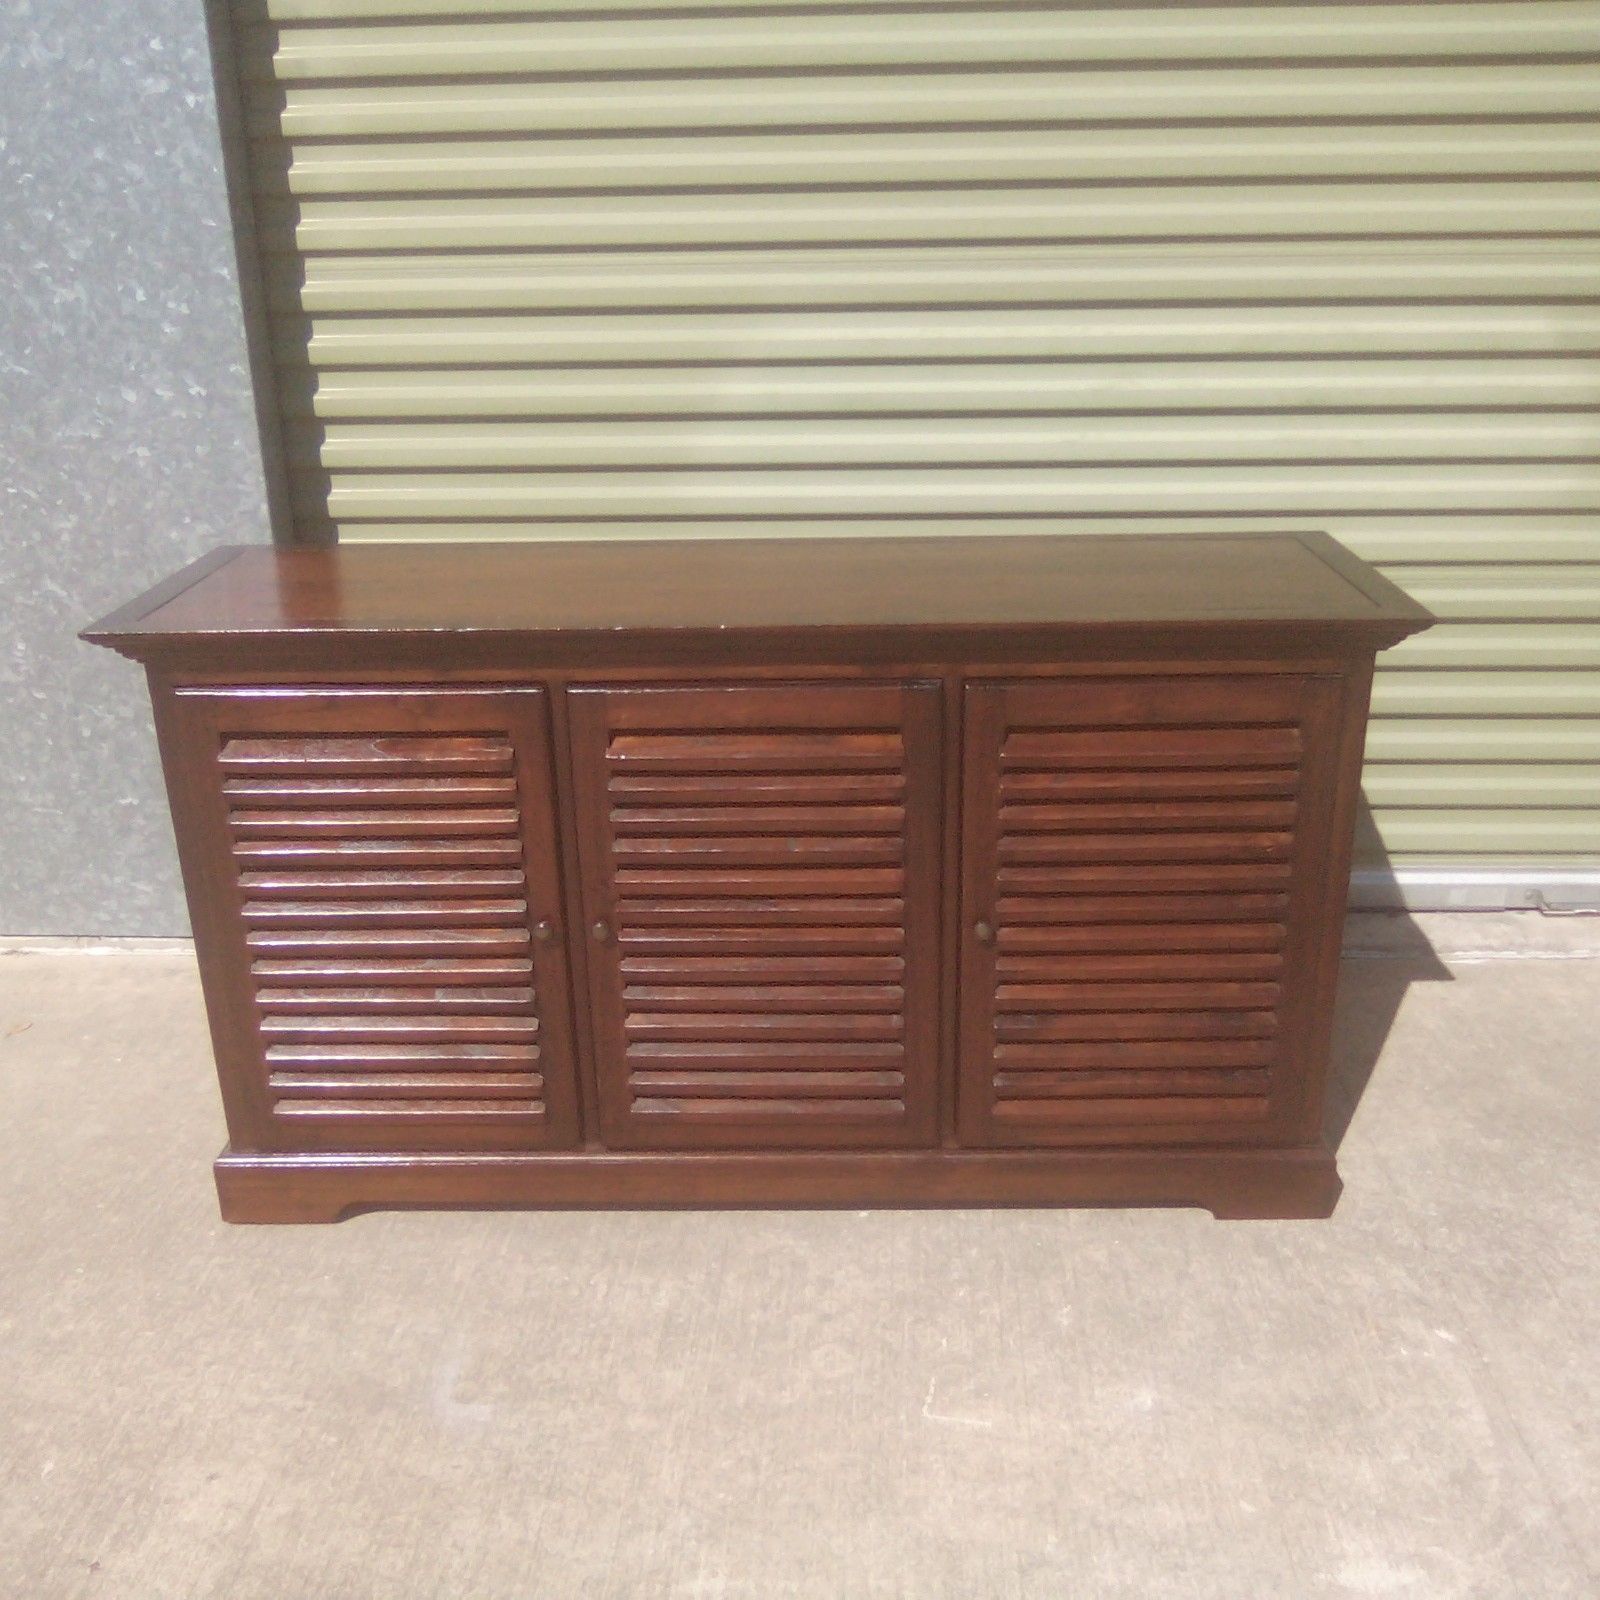 TV Stand / Storage Cabinet I'm really great condition overall n